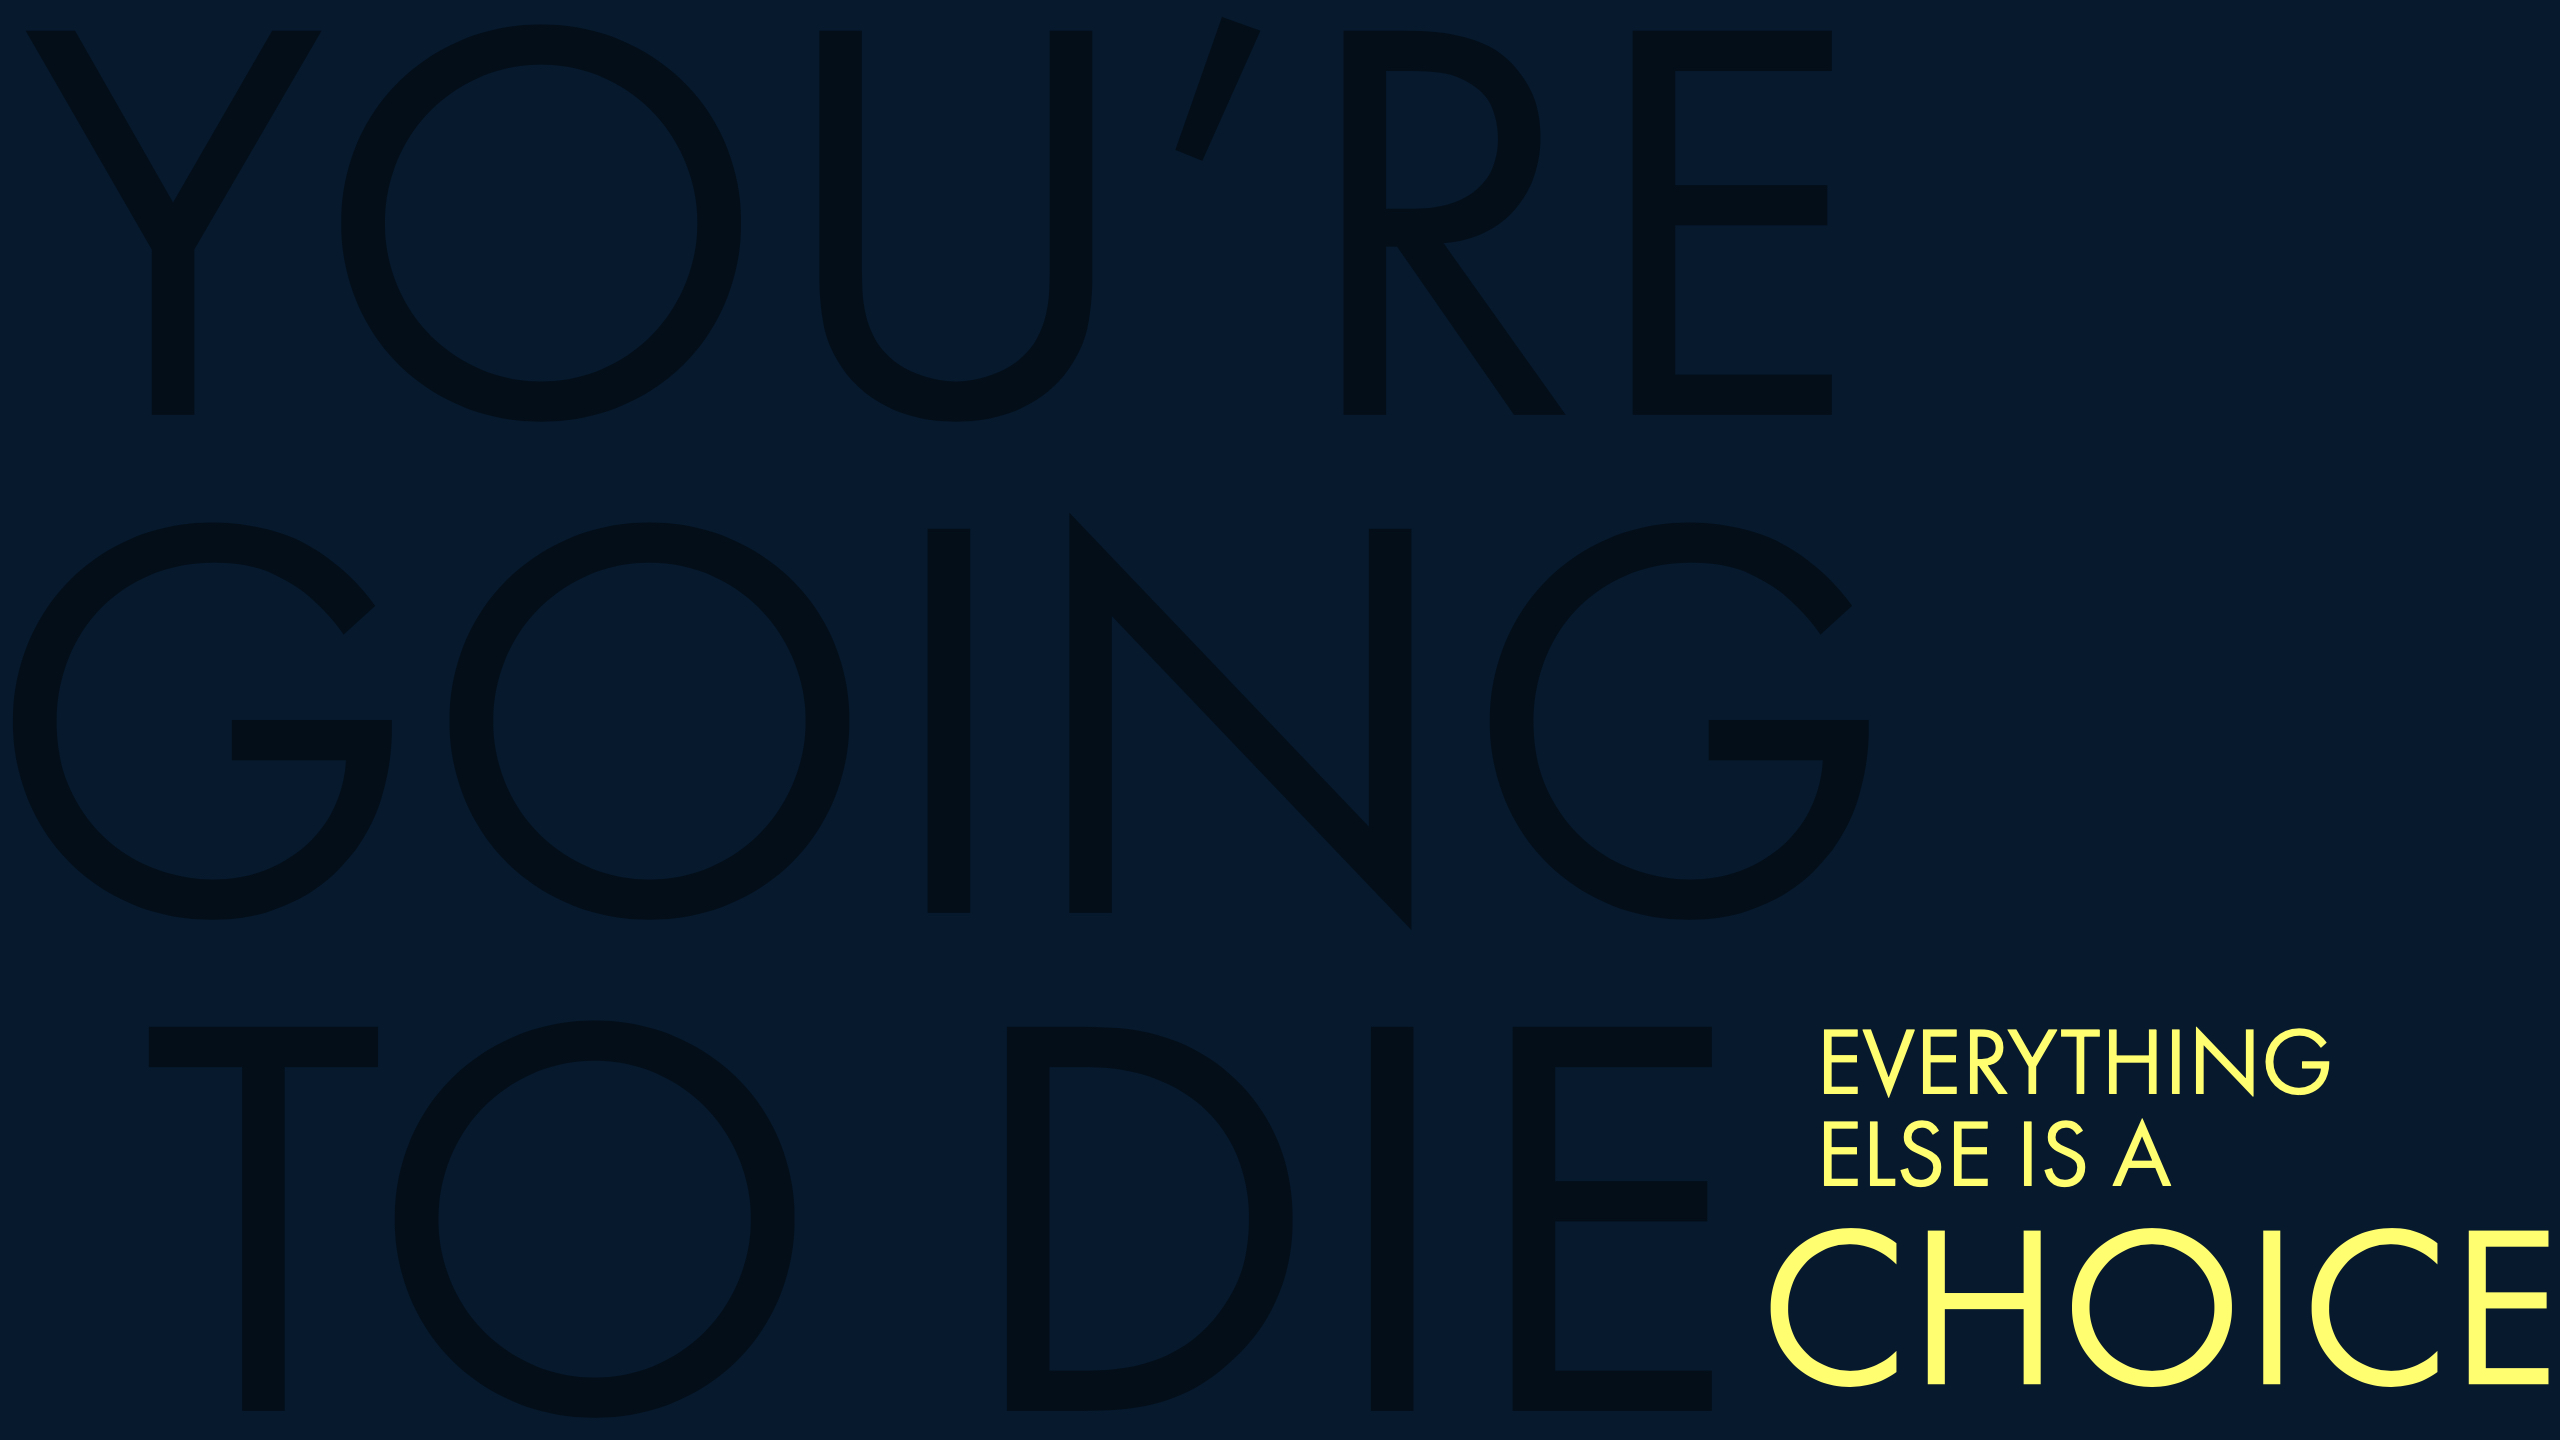 You're Going to Die. Everything Else is a Choice.